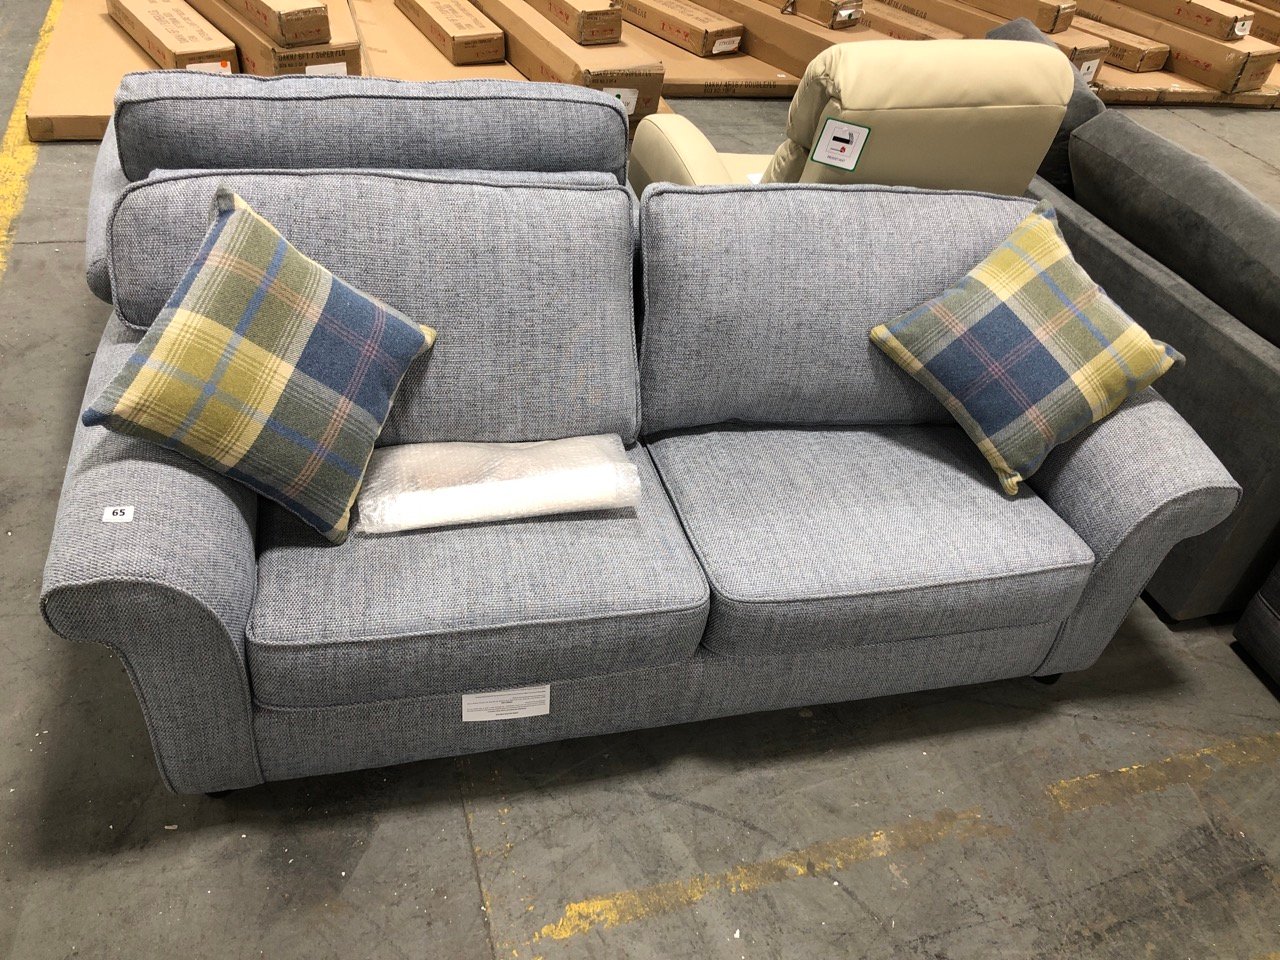 JULIPA CHILTERN 3 SEATER SOFA IN GREYISH BLUE RRP- £799 (COLLECTION OR OPTIONAL DELIVERY)